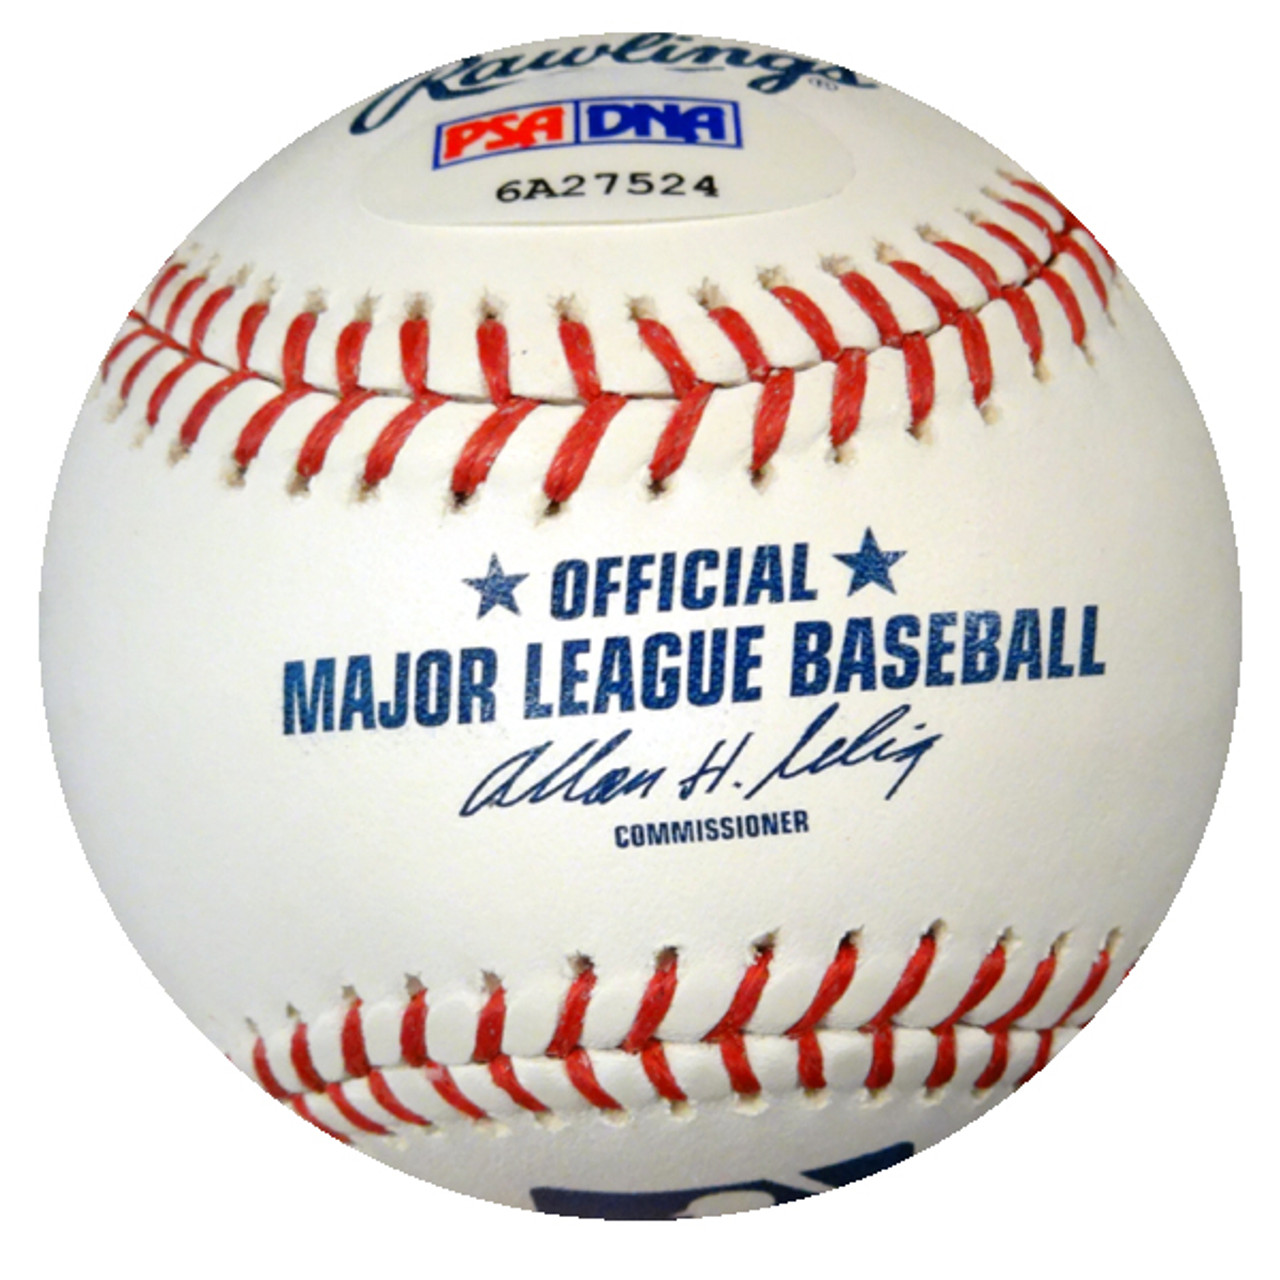 Robinson Cano Autographed Official MLB Baseball Seattle Mariners PSA/DNA  #6A27524